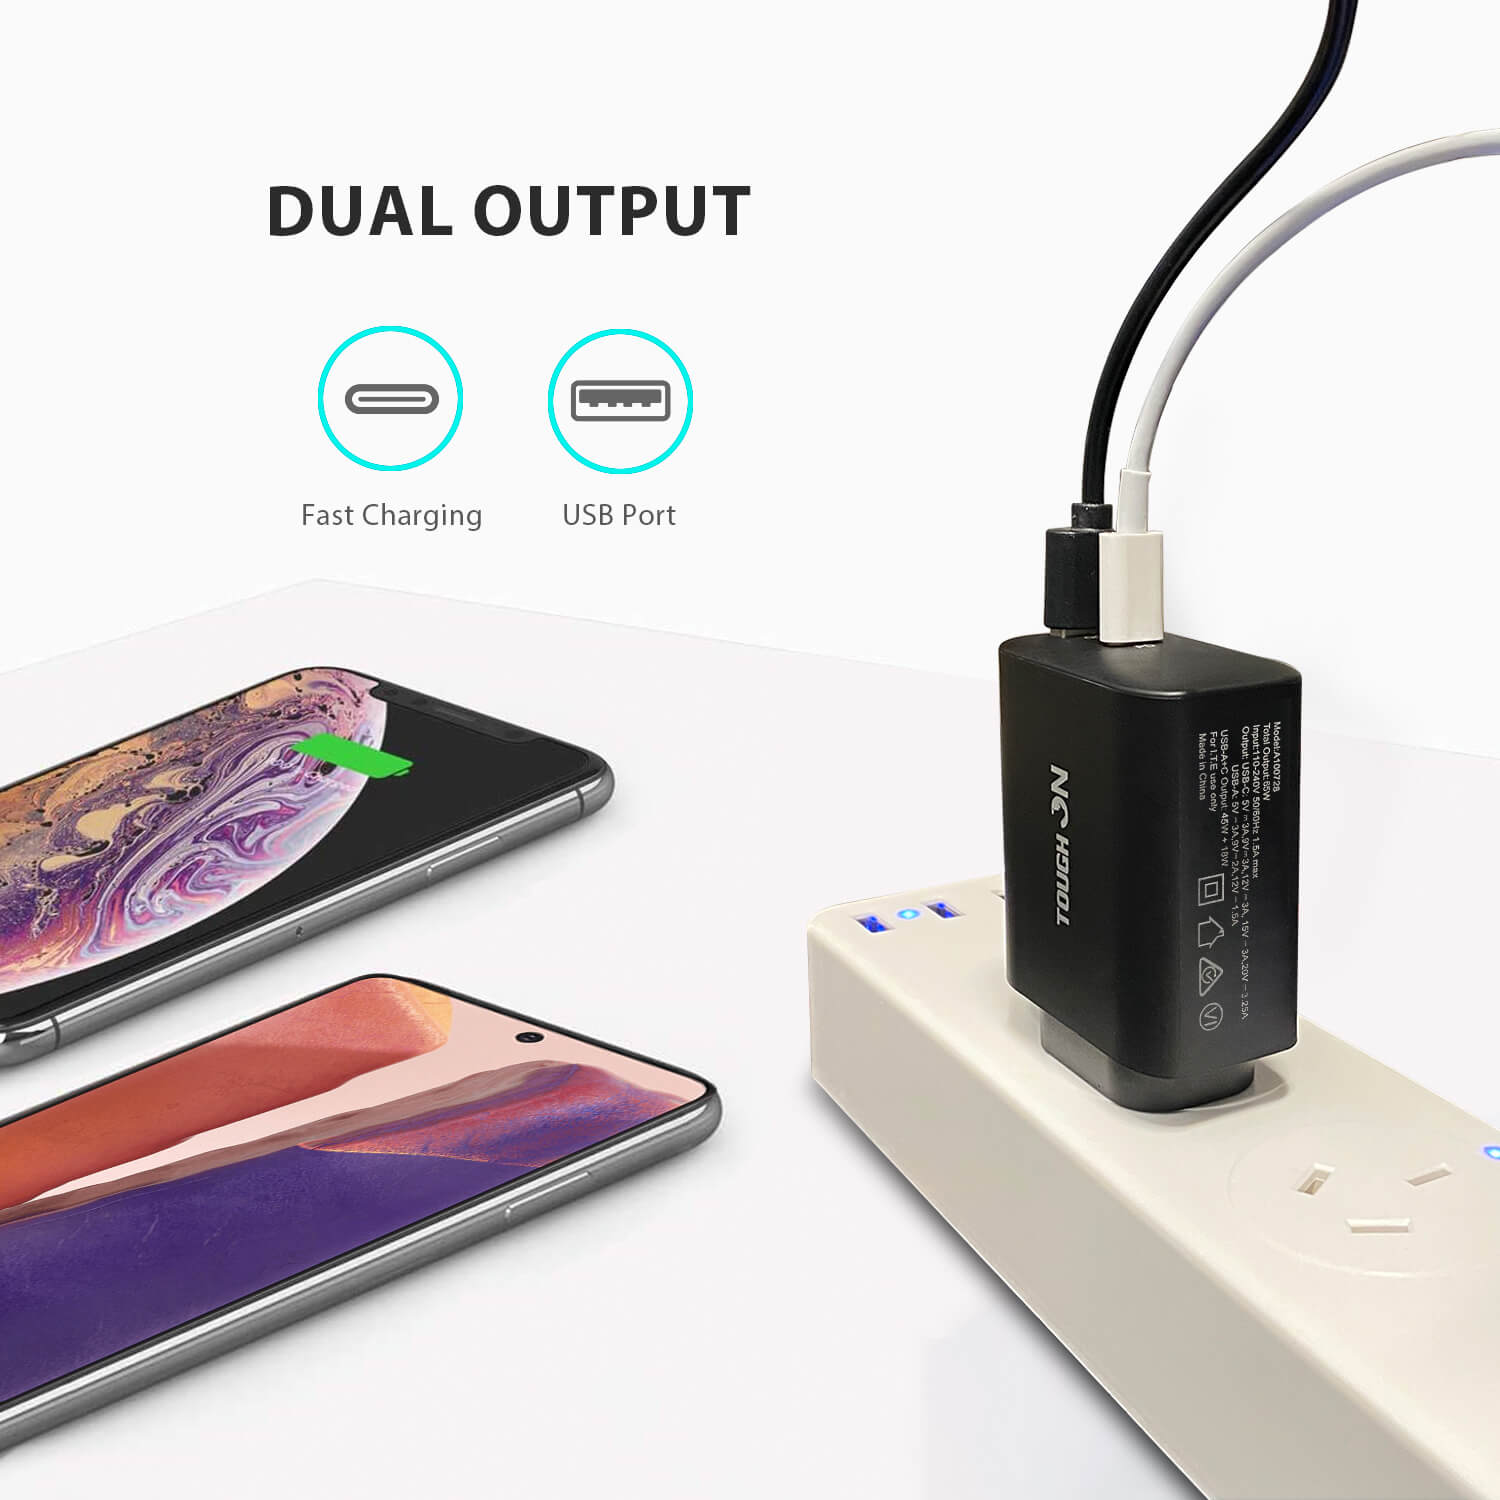 Tough on 65W Dual Port PD & QC 3.0 Fast Wall Charger